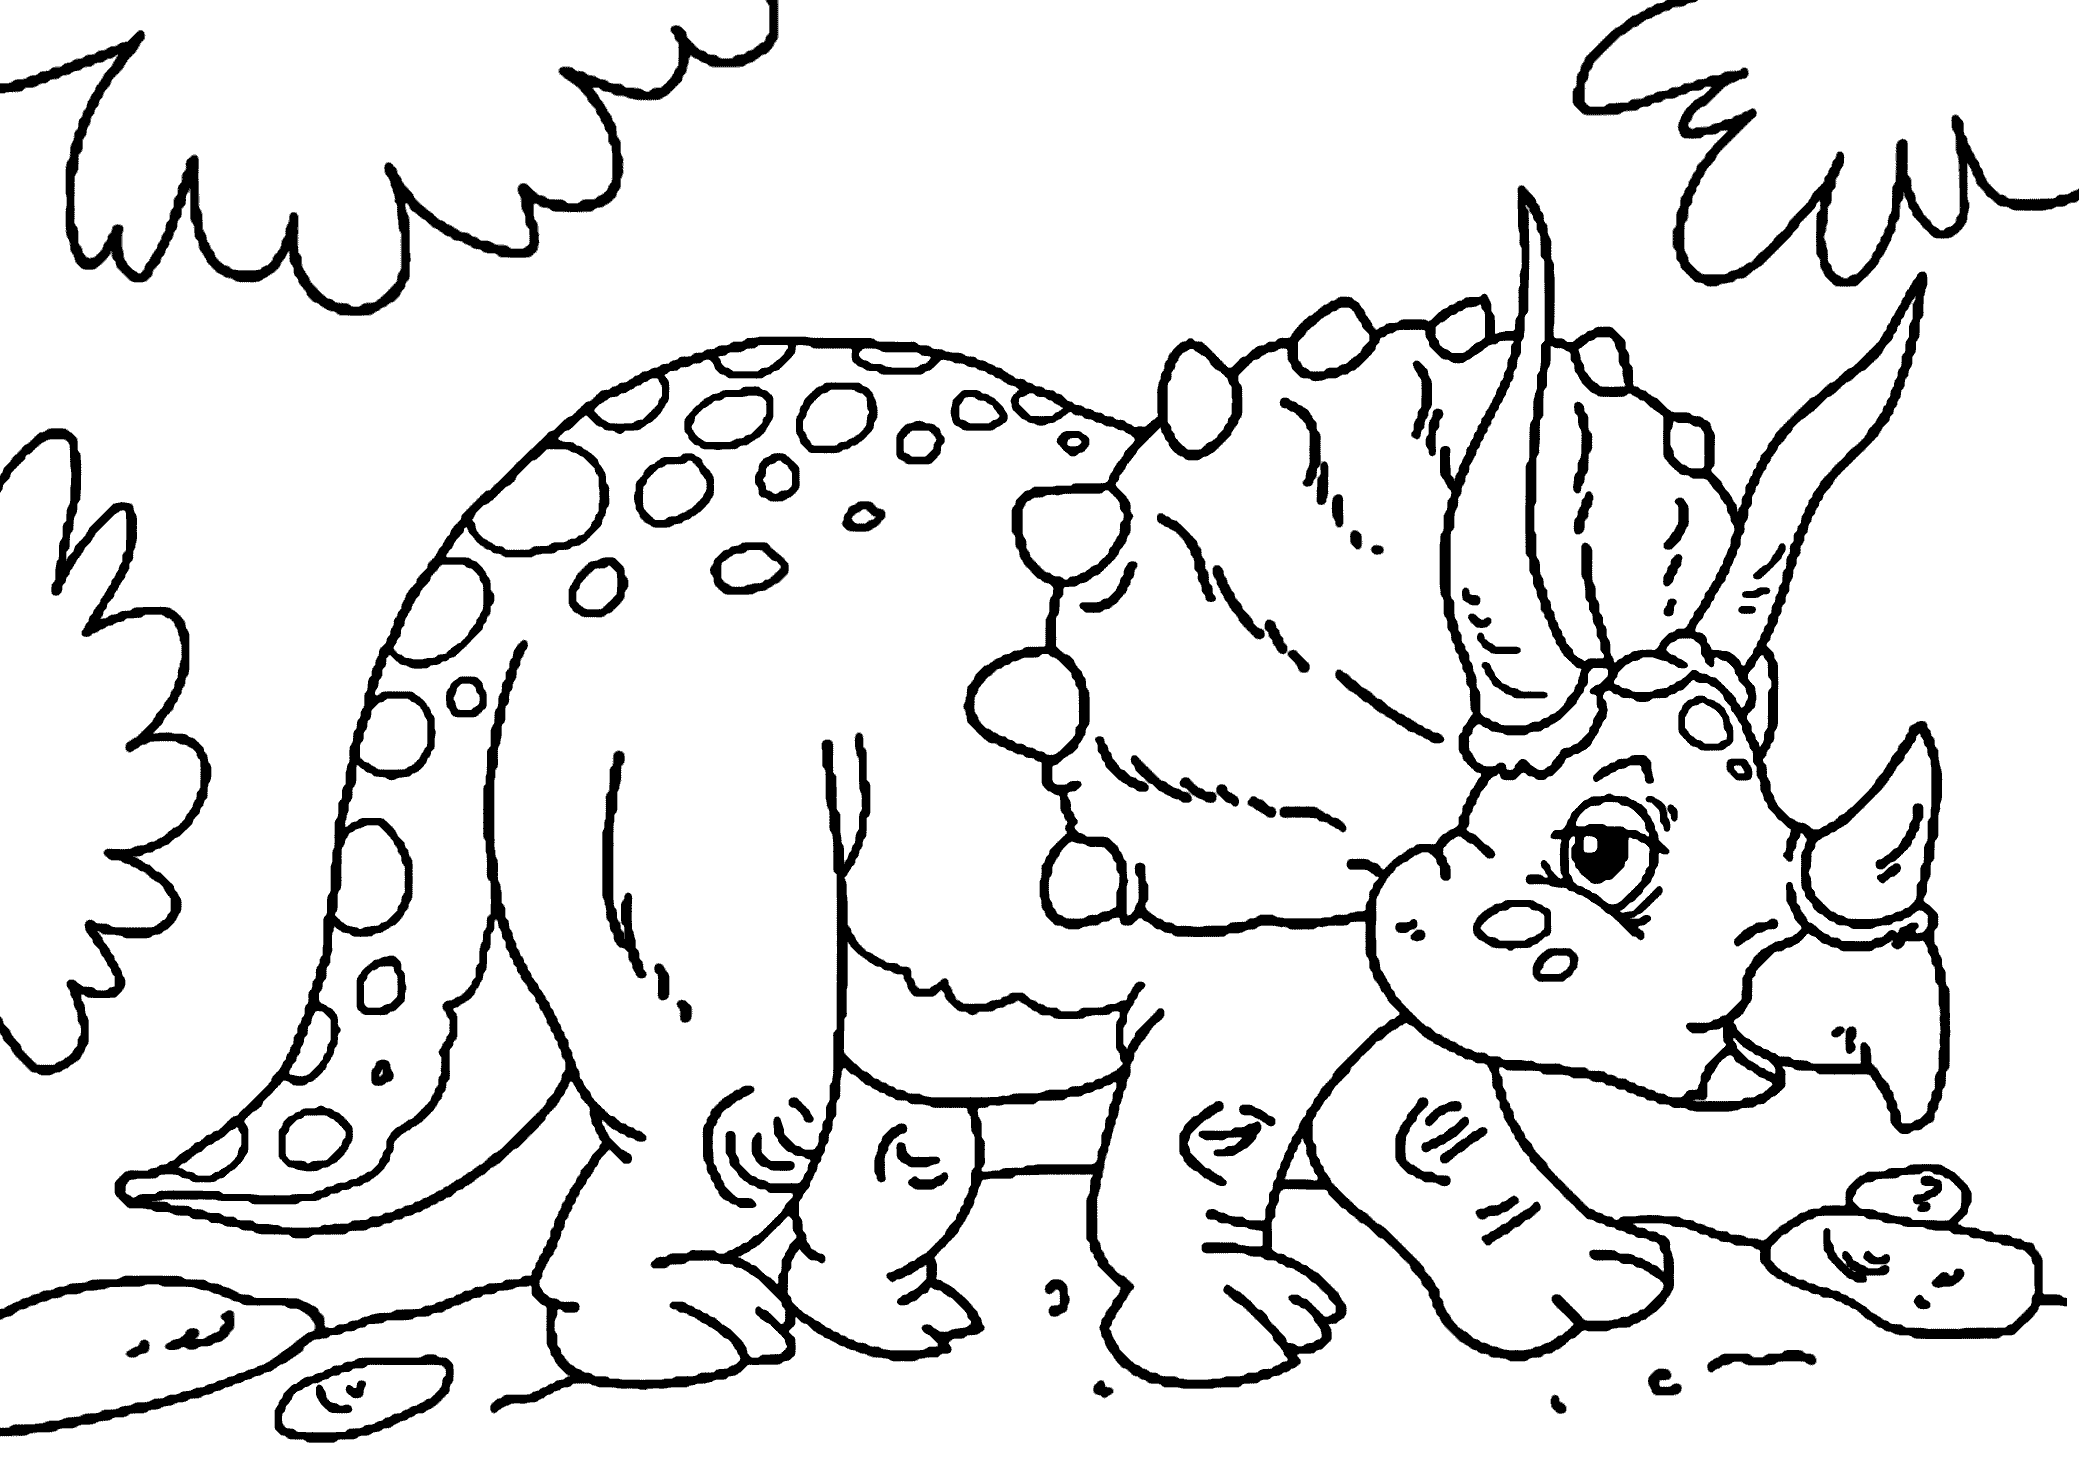 triceratops pictures to color cute little triceratops dinosaur coloring pages for kids triceratops color pictures to 